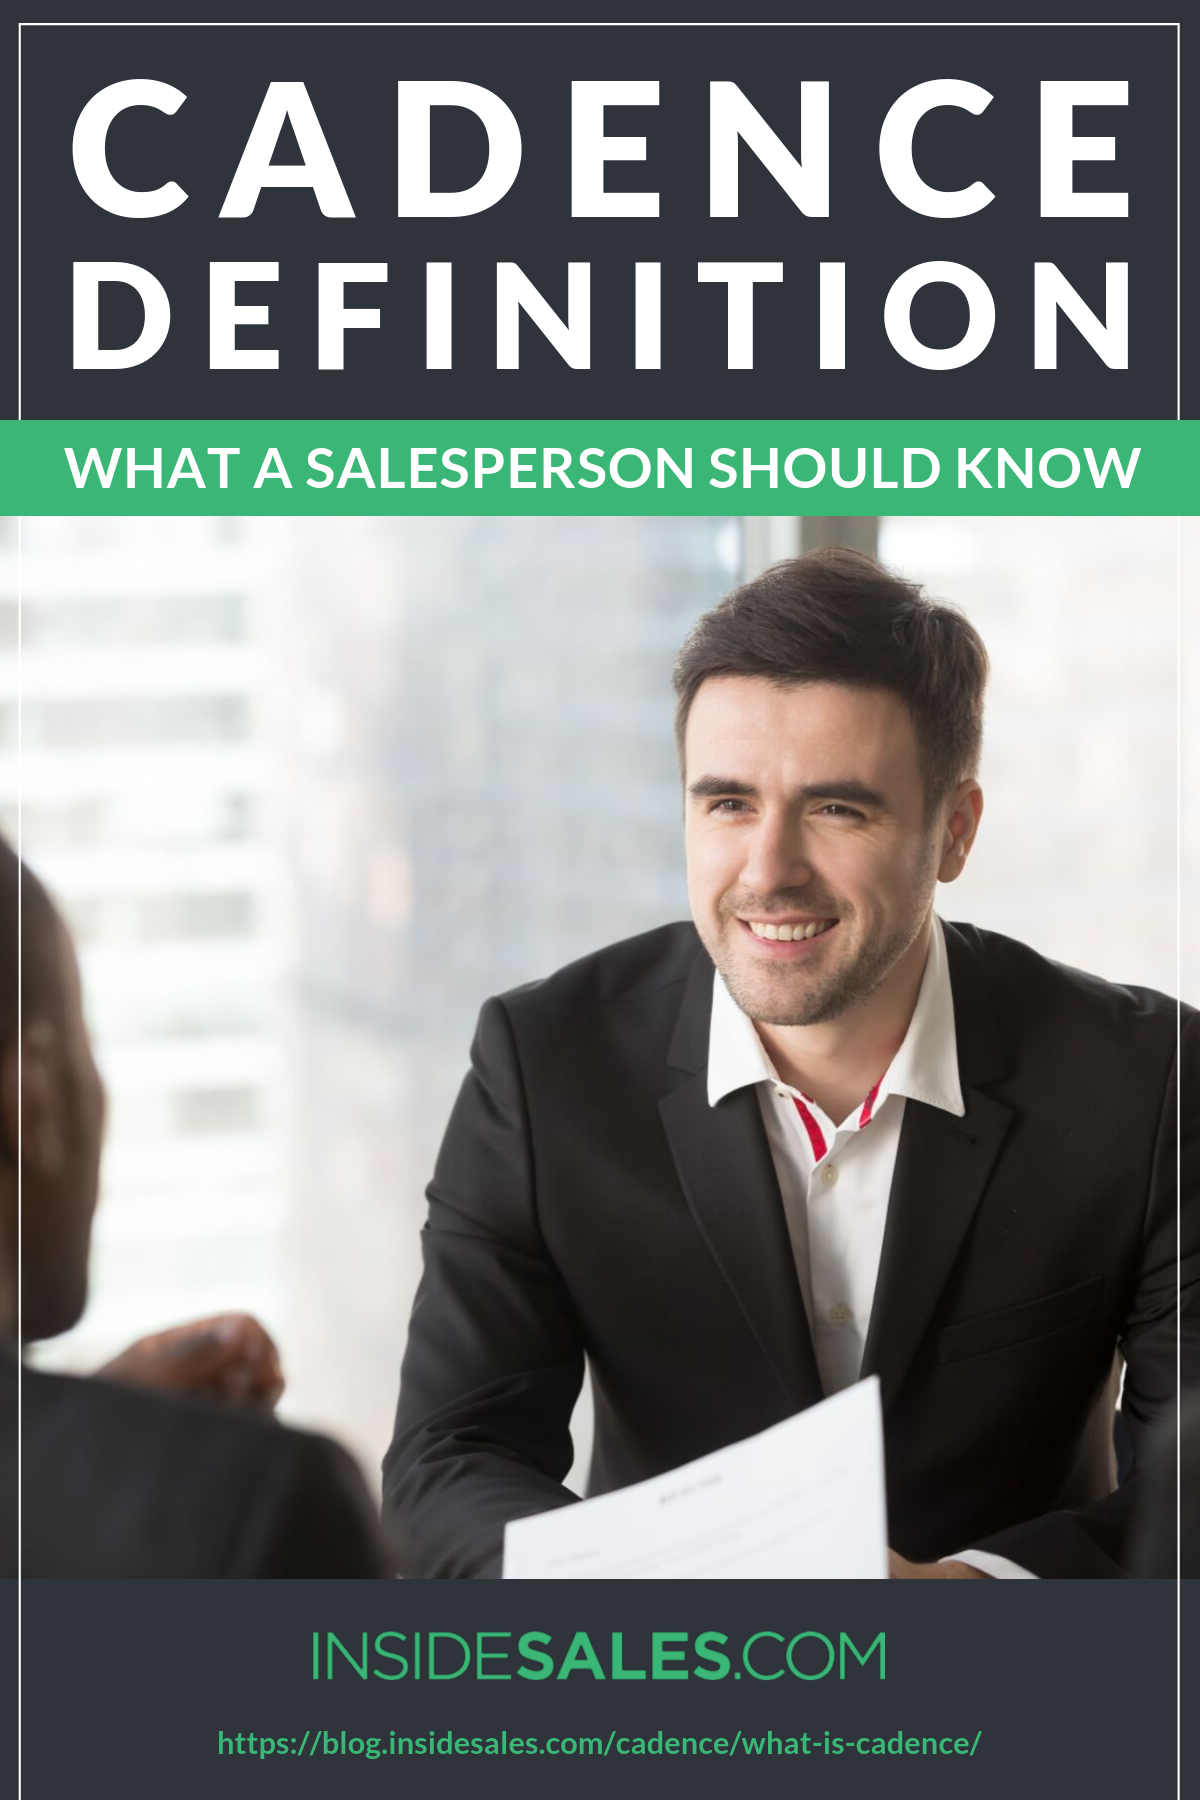 Cadence Definition: What A Salesperson Should Know https://resources.insidesales.com/blog/cadence/what-is-cadence/